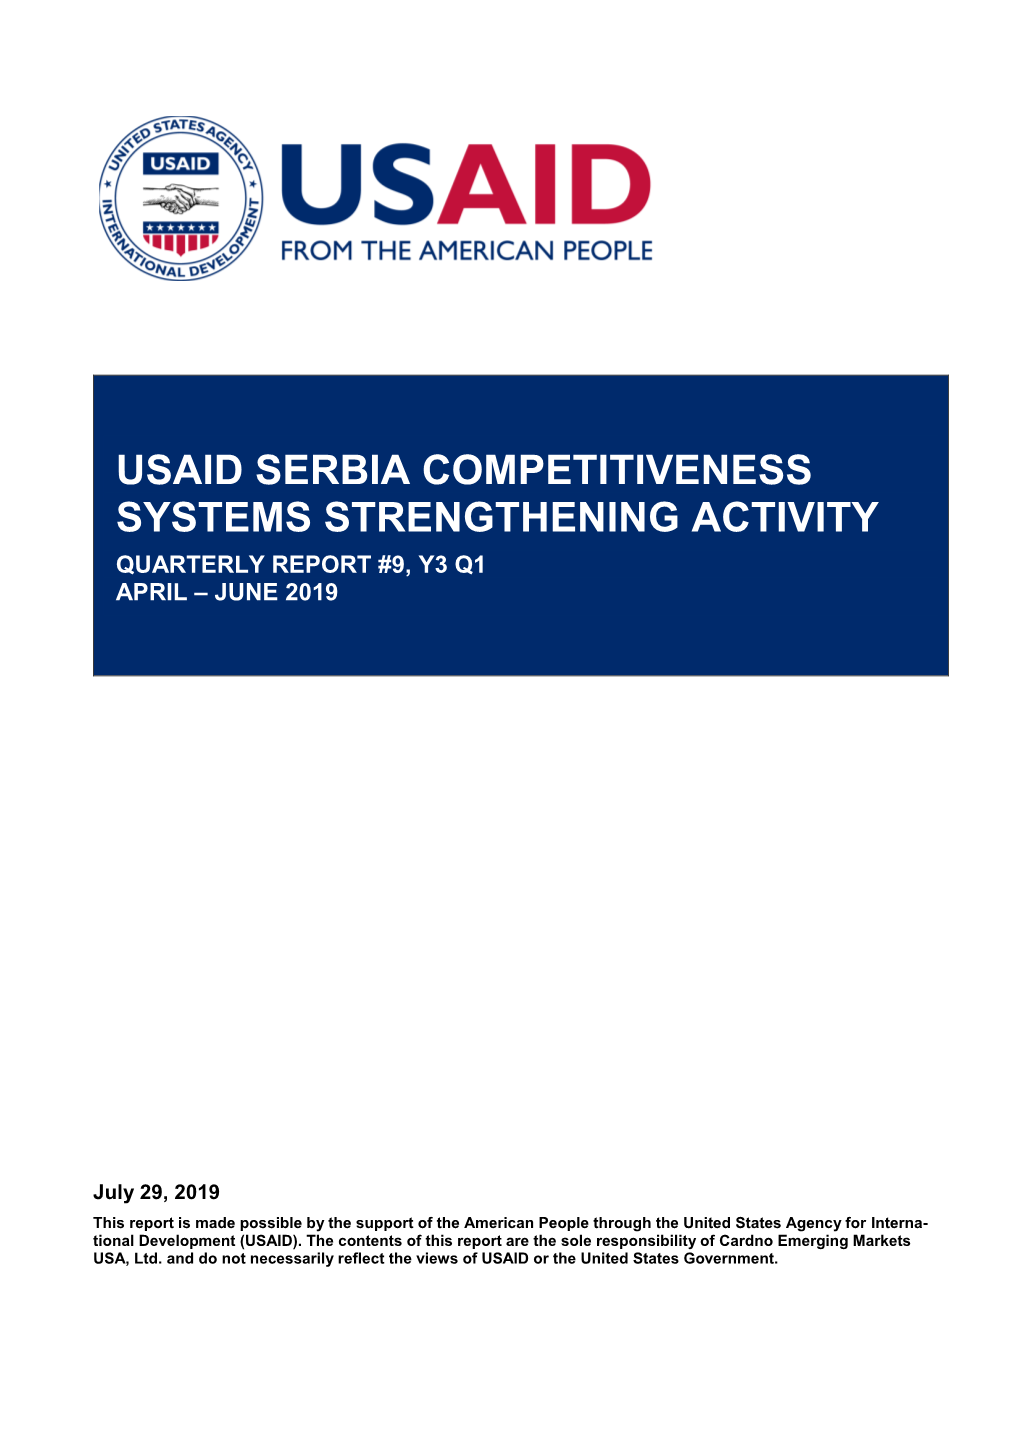 Usaid Serbia Competitiveness Systems Strengthening Activity Quarterly Report #9, Y3 Q1 April – June 2019